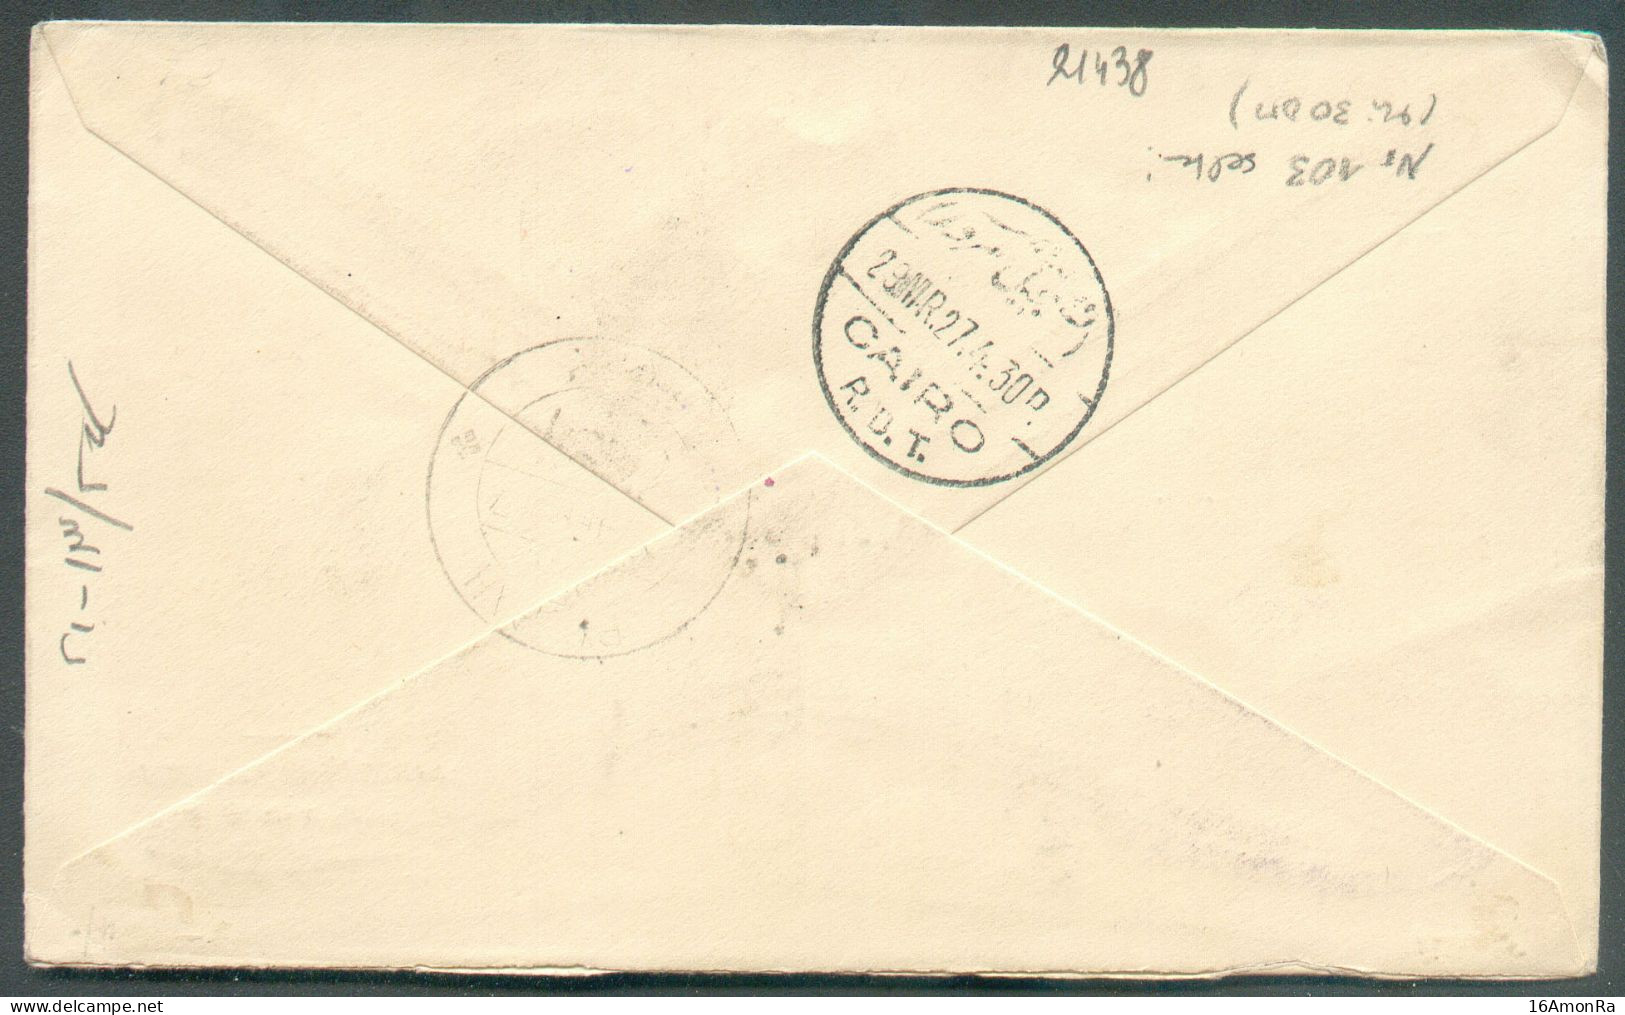 27pi PA. + Issue CONGRES INTERNATIONAL DU COTON 1927 Cacn. ALEXANDRIA On Regisetred Cover + Air Mail 29 March 1927 To Ba - Poste Aérienne